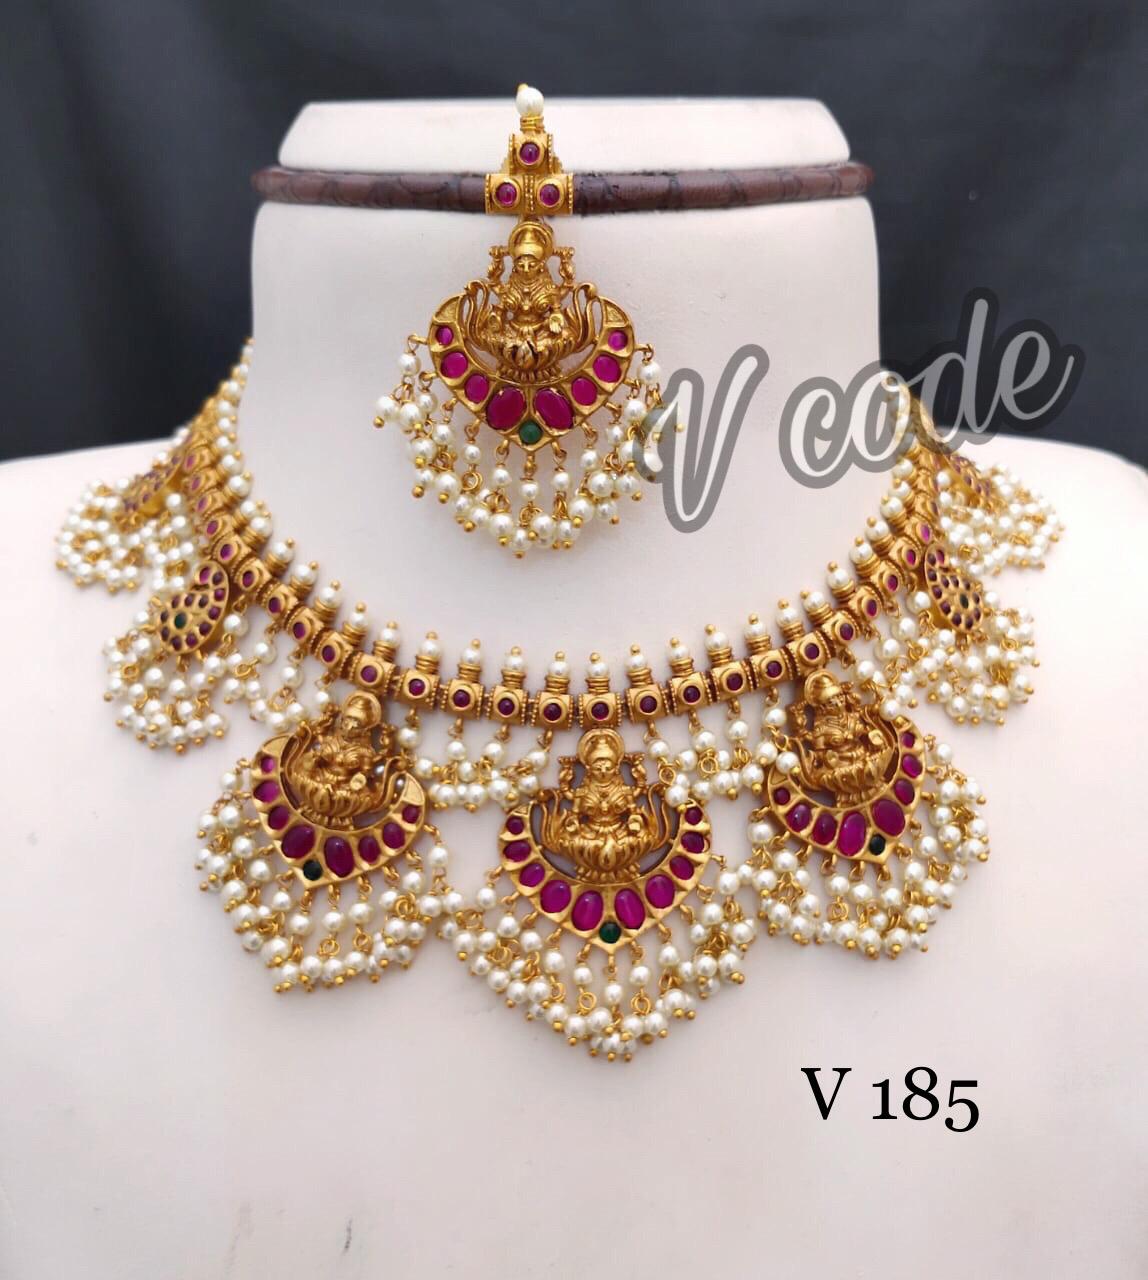 Gold Look a like Jewlery Collection June 2021 - Indian Jewelry Designs